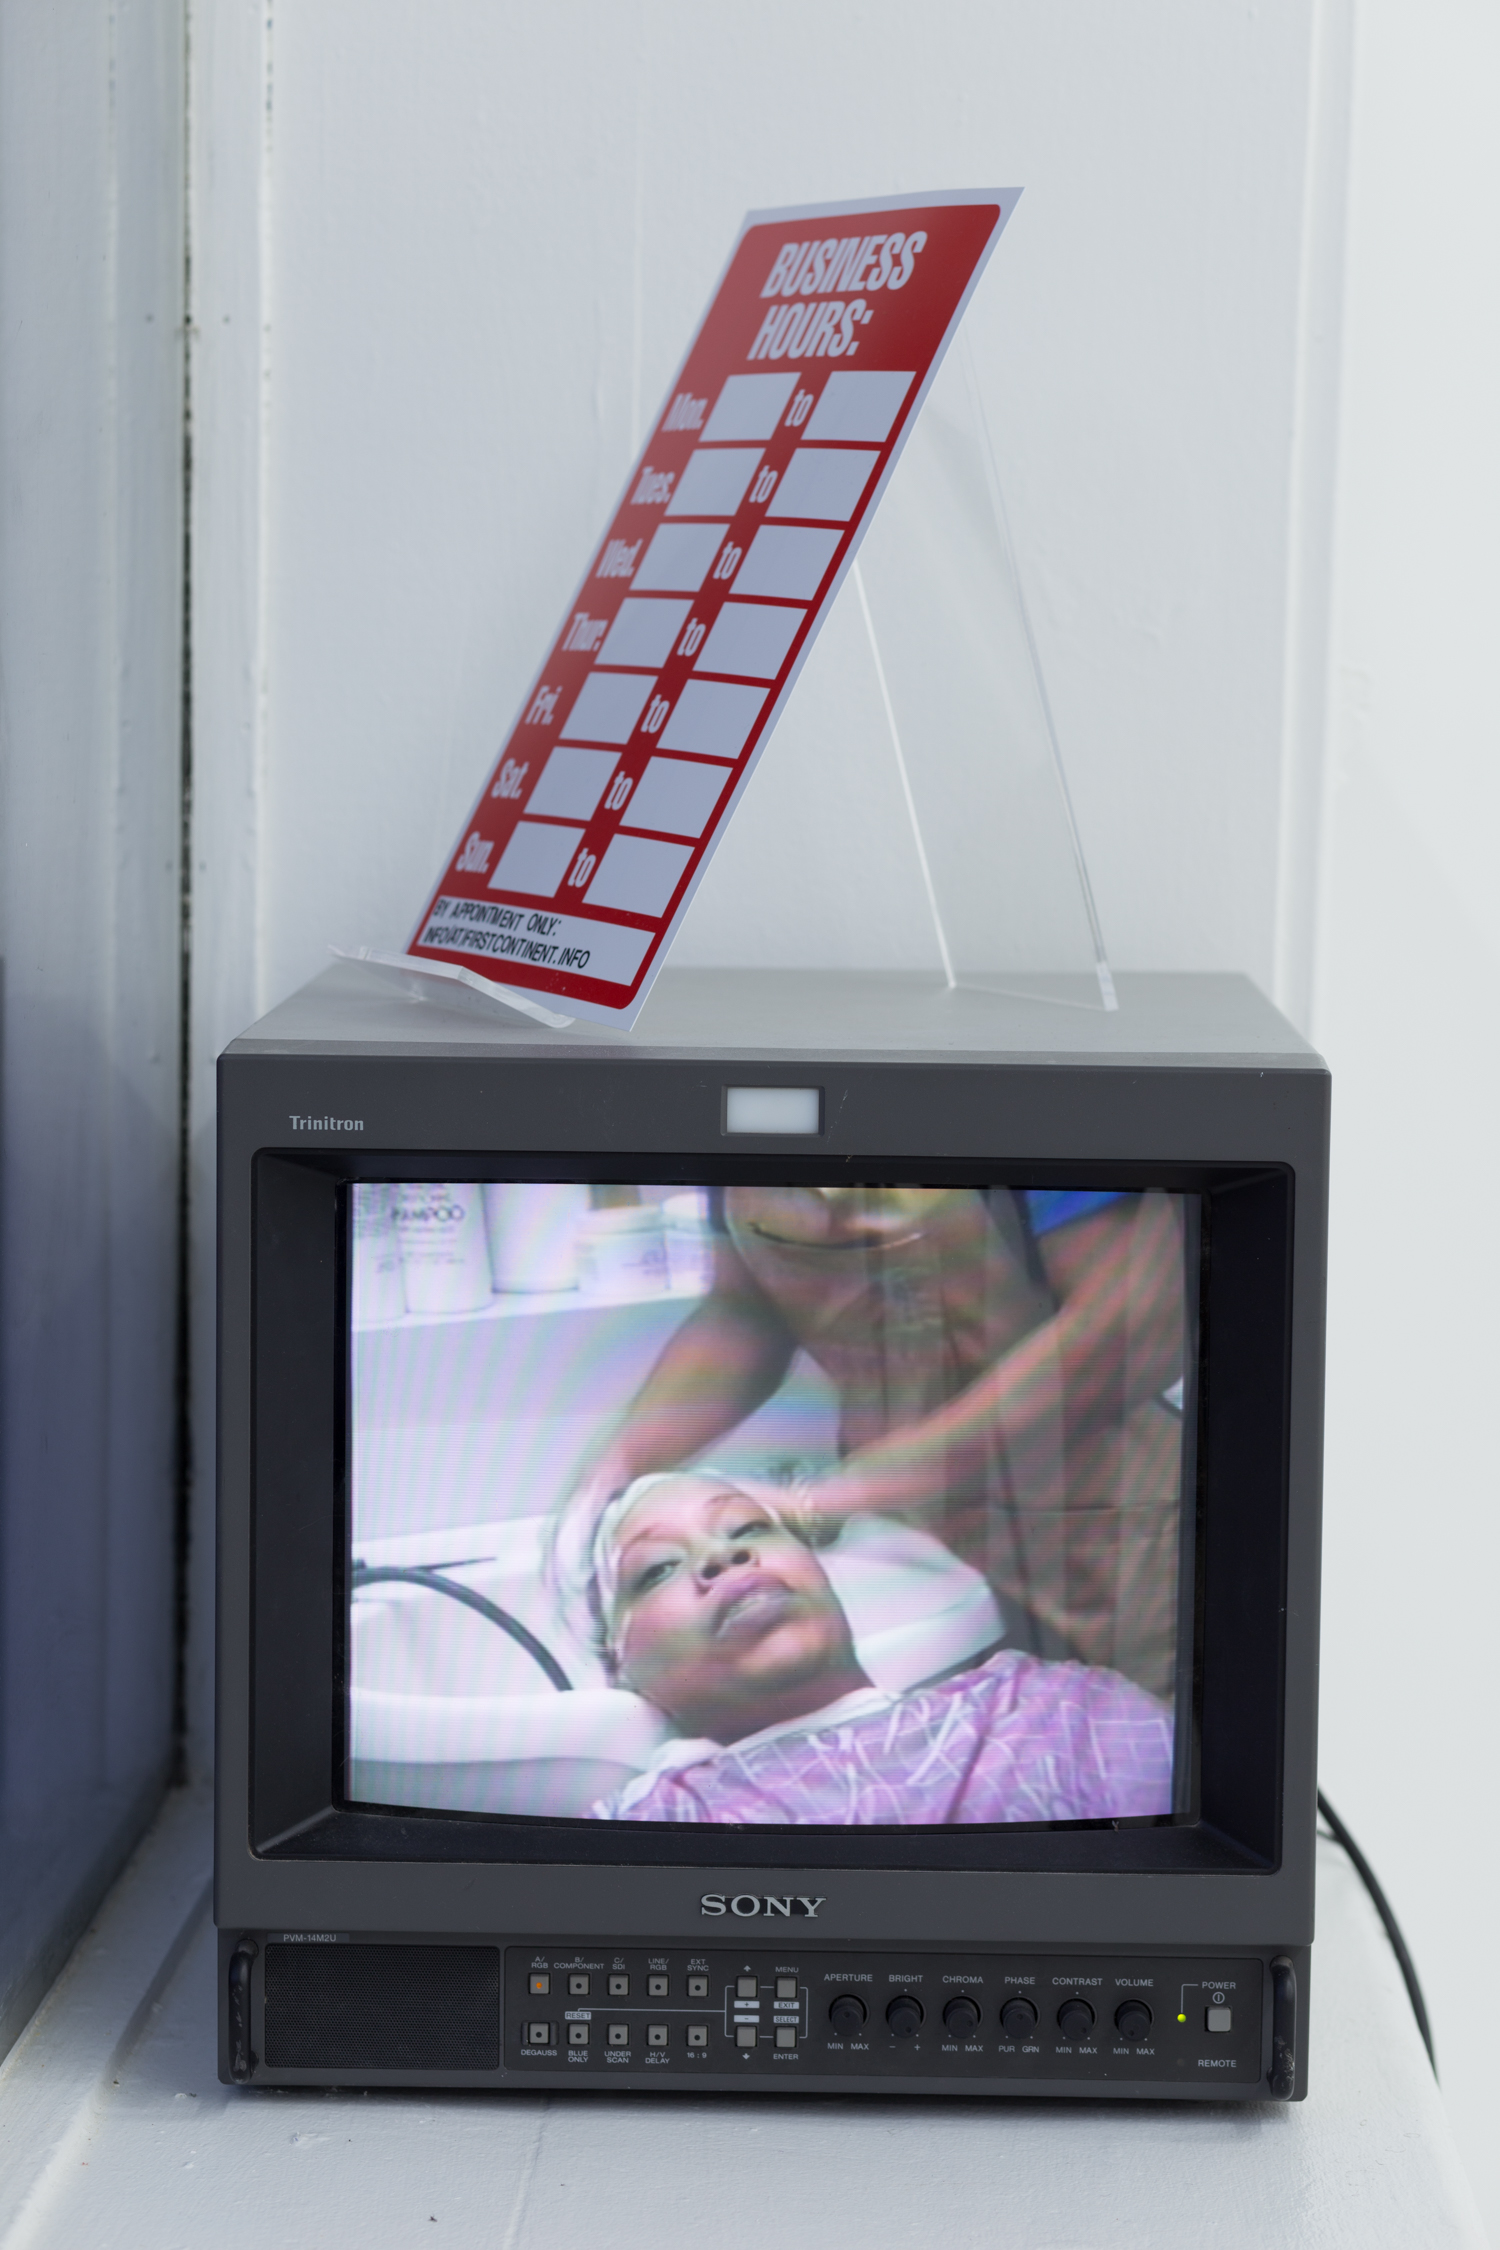 A CRT monitor sits in a windowsill with a blank business hours sign above it. It is playing the documentary short, “Diana’s Hair Ego